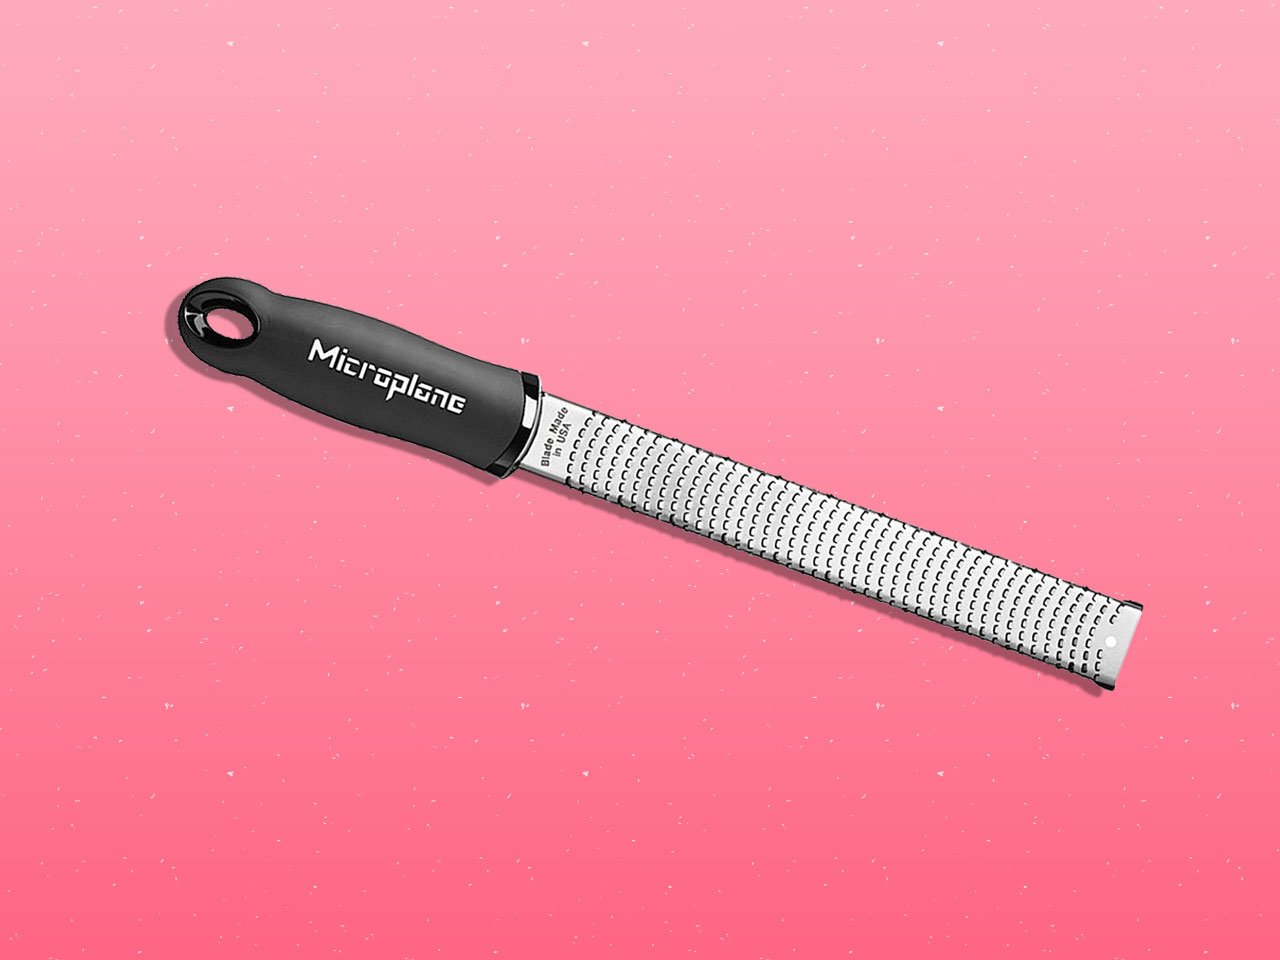 Microplane grater on pink background.